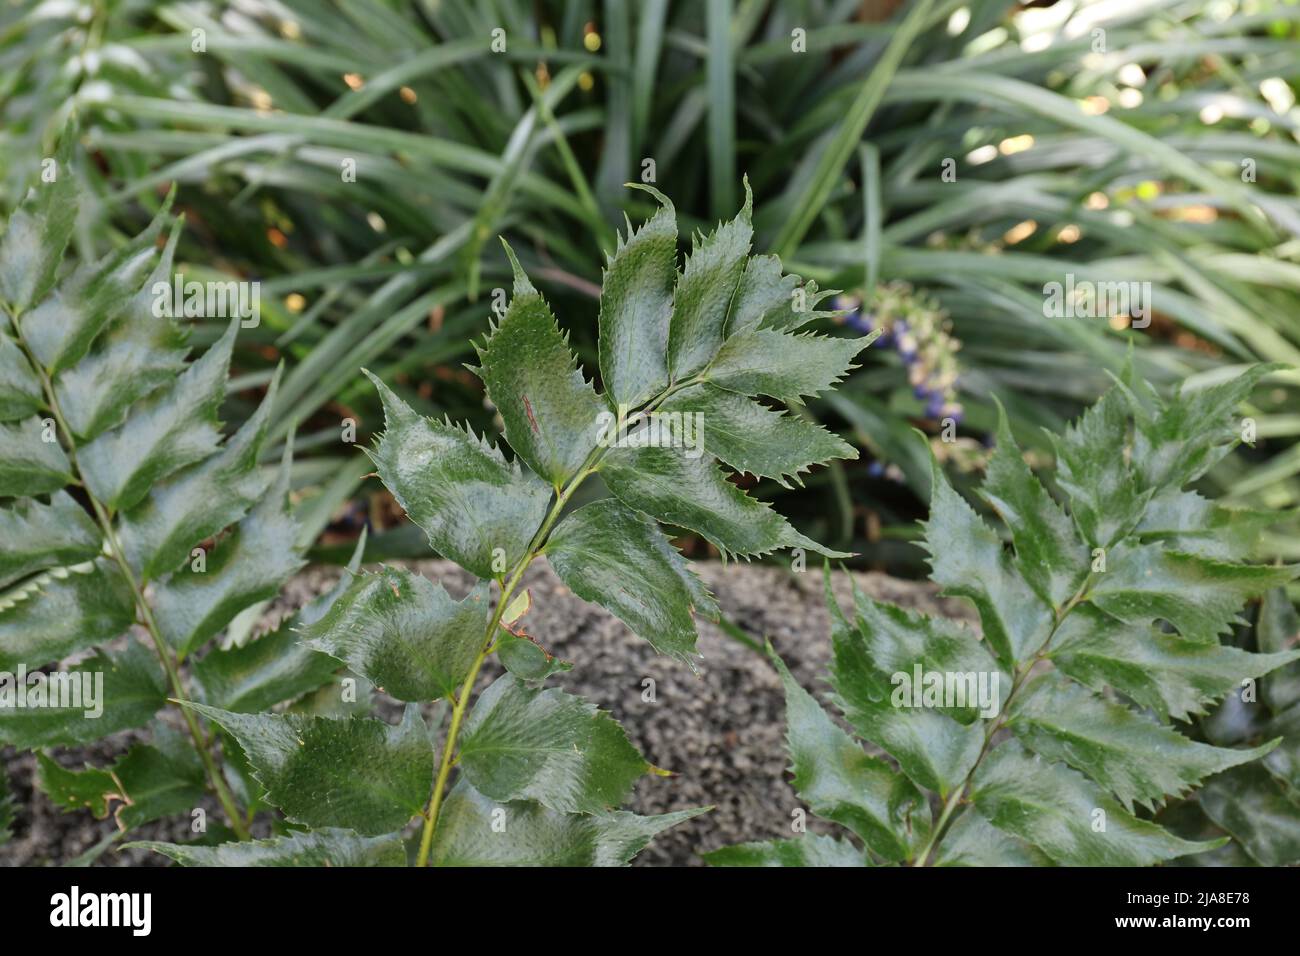 Branches of a Holly Fern, Cyrtomium falcatum, growing in a garden Stock Photo